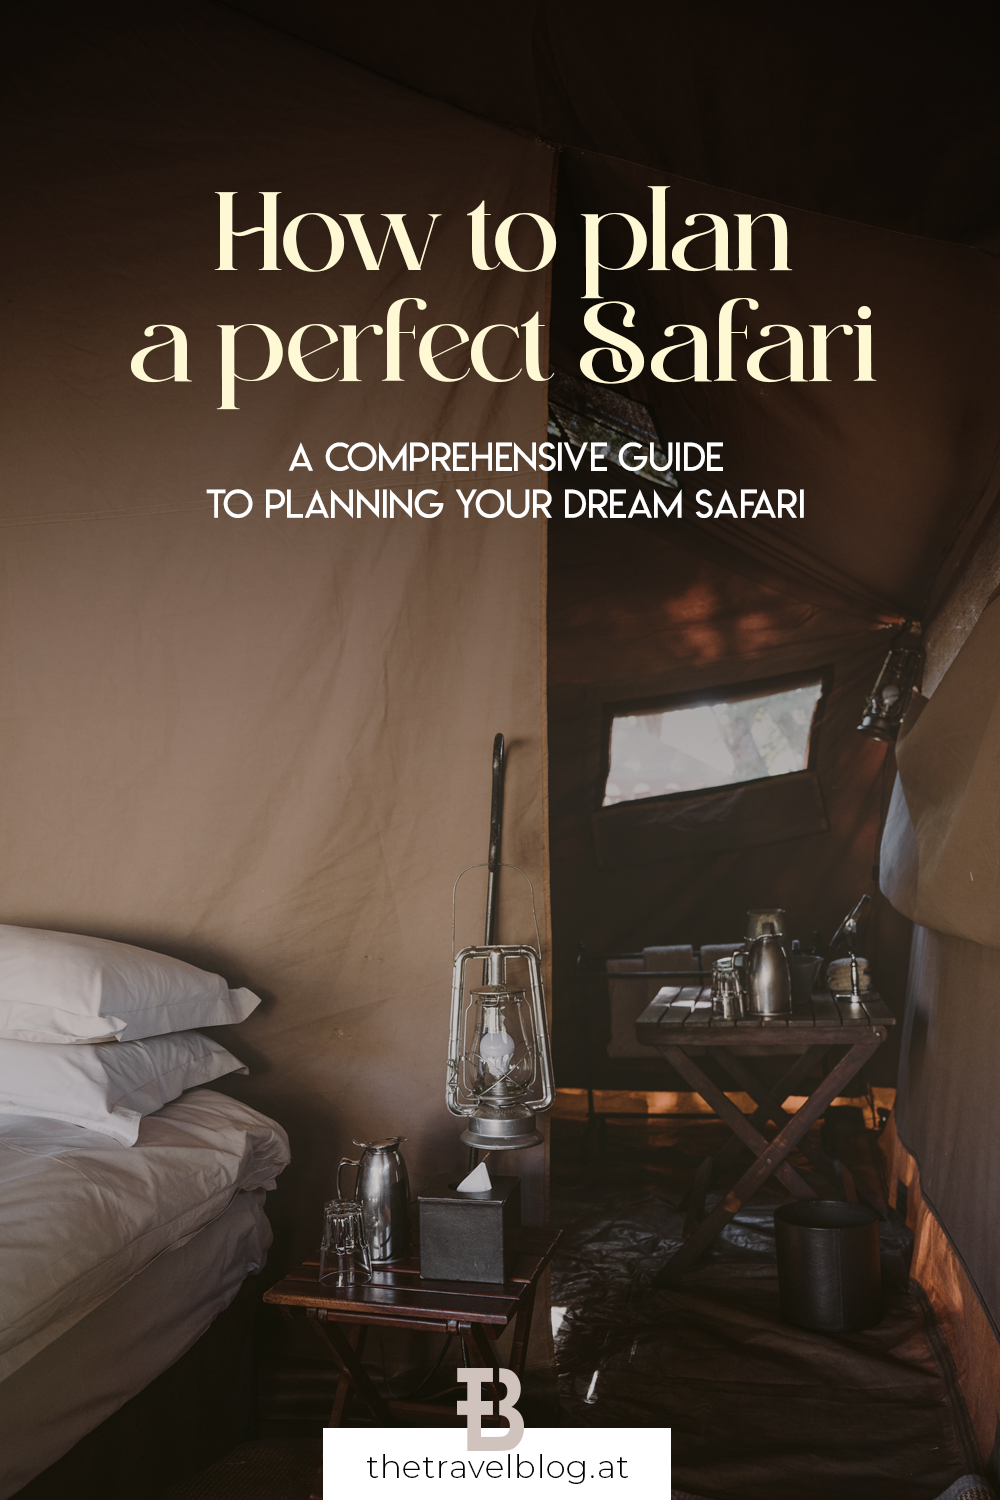 How to plan a perfect safari: A comprehensive guide covering everything from destinations to seasonality and more